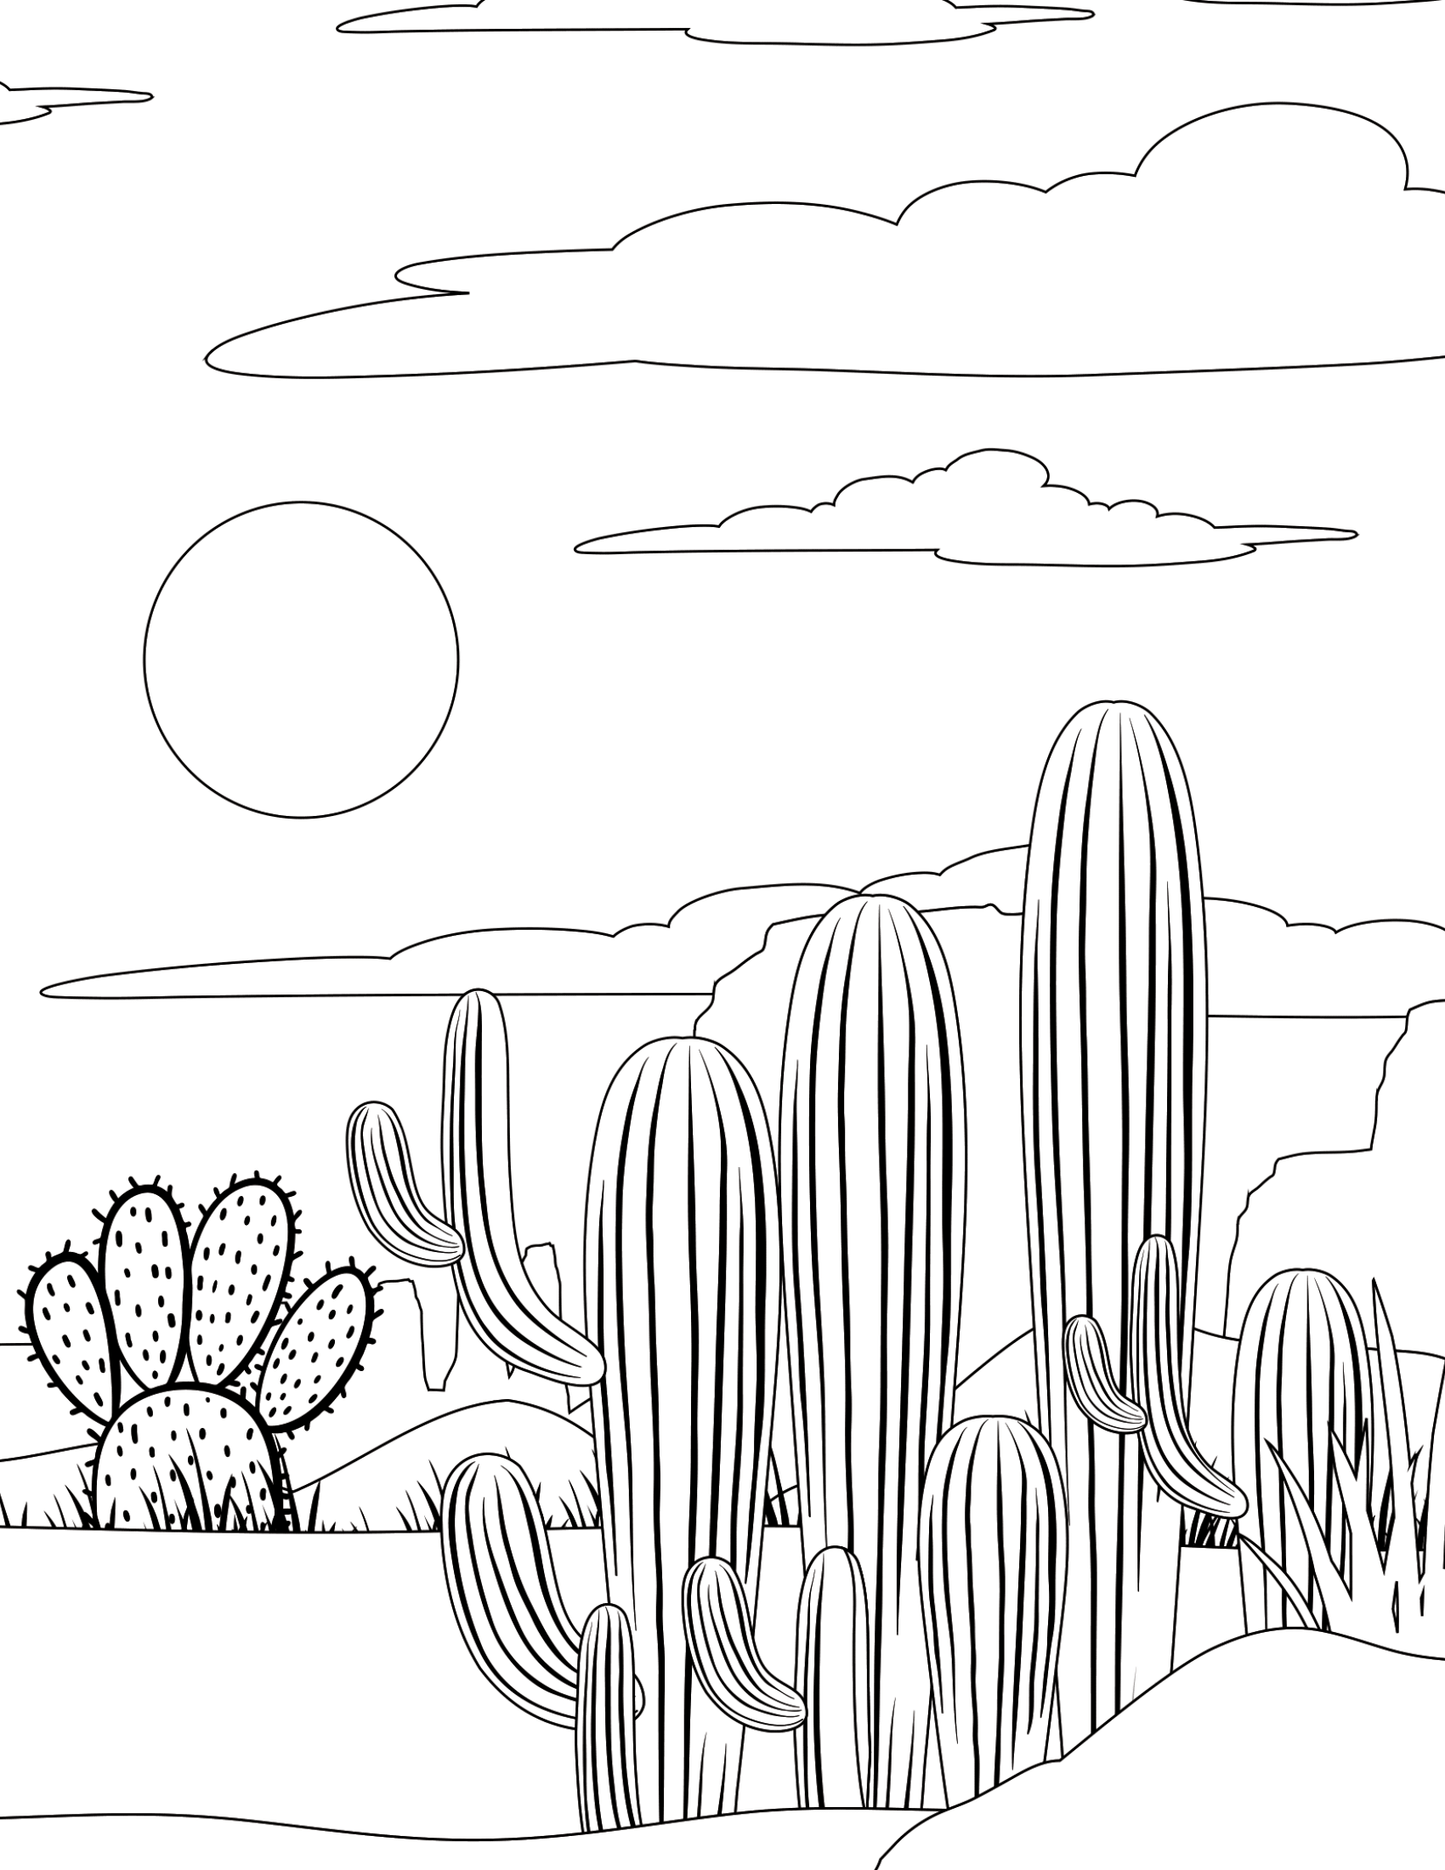 Embrace the Succ! Life Lessons from a Succulent: The Coloring Book.